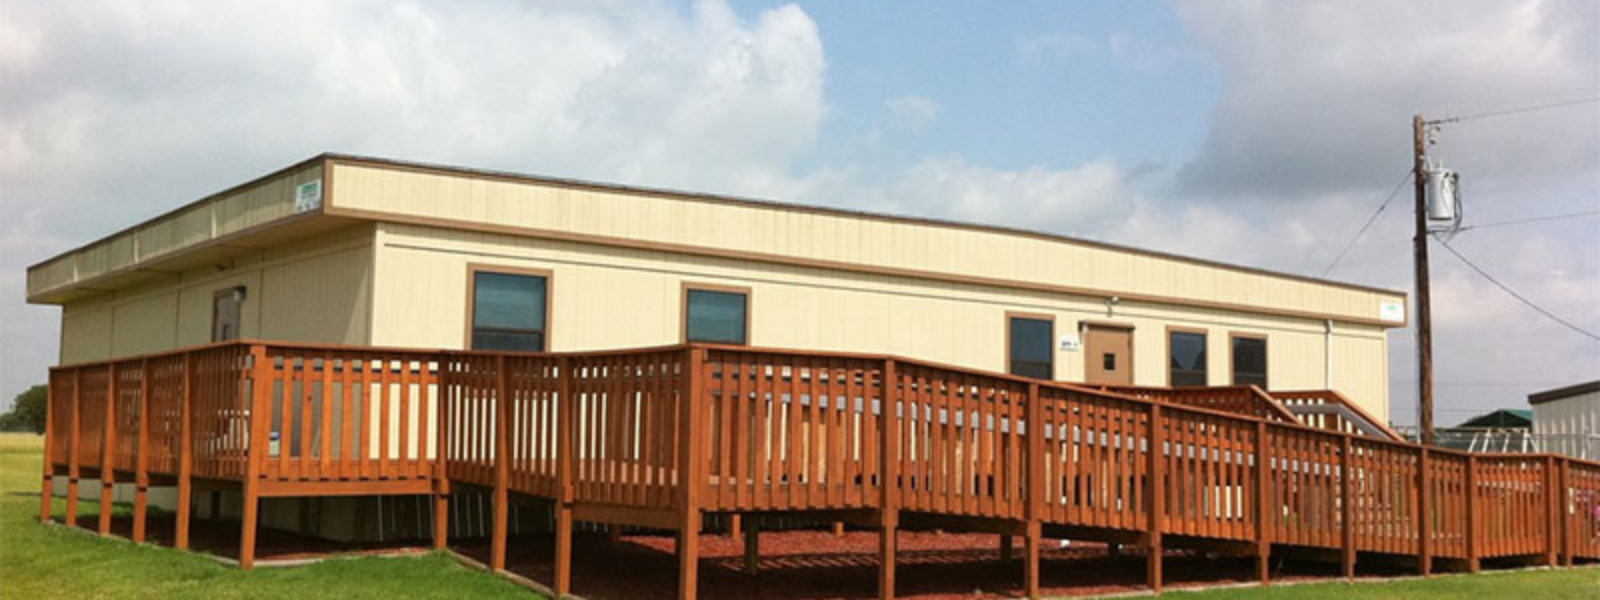 Buying a used modular building makes sense for many reasons